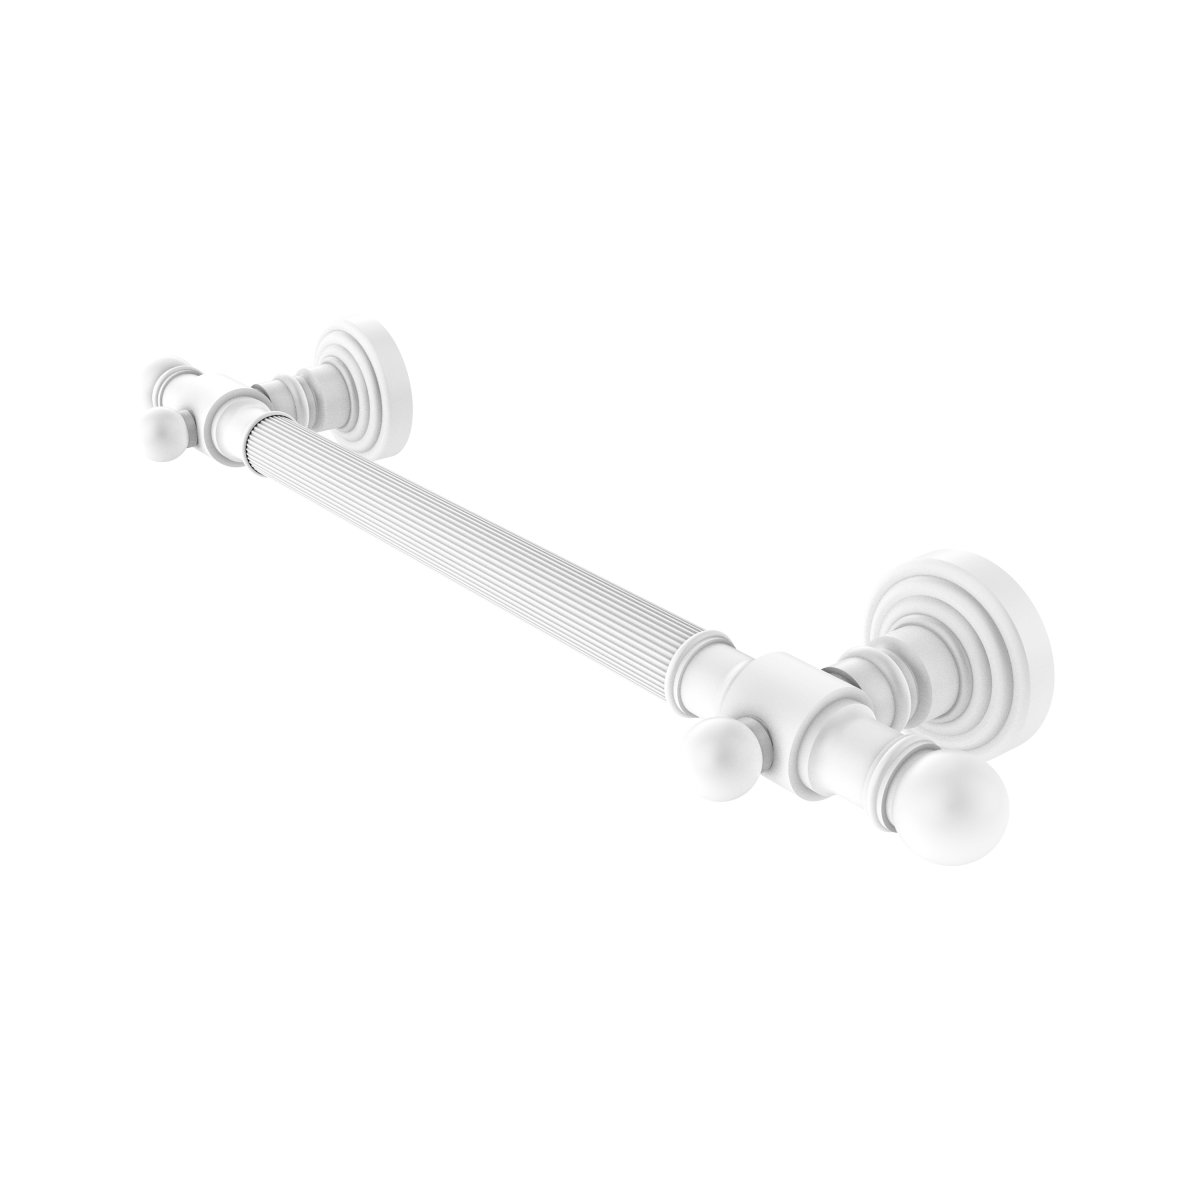 Picture of Allied Brass WP-GRR-24-WHM 24 in. Reeded Grab Bar, Matte White - 3.5 x 30 x 24 in.